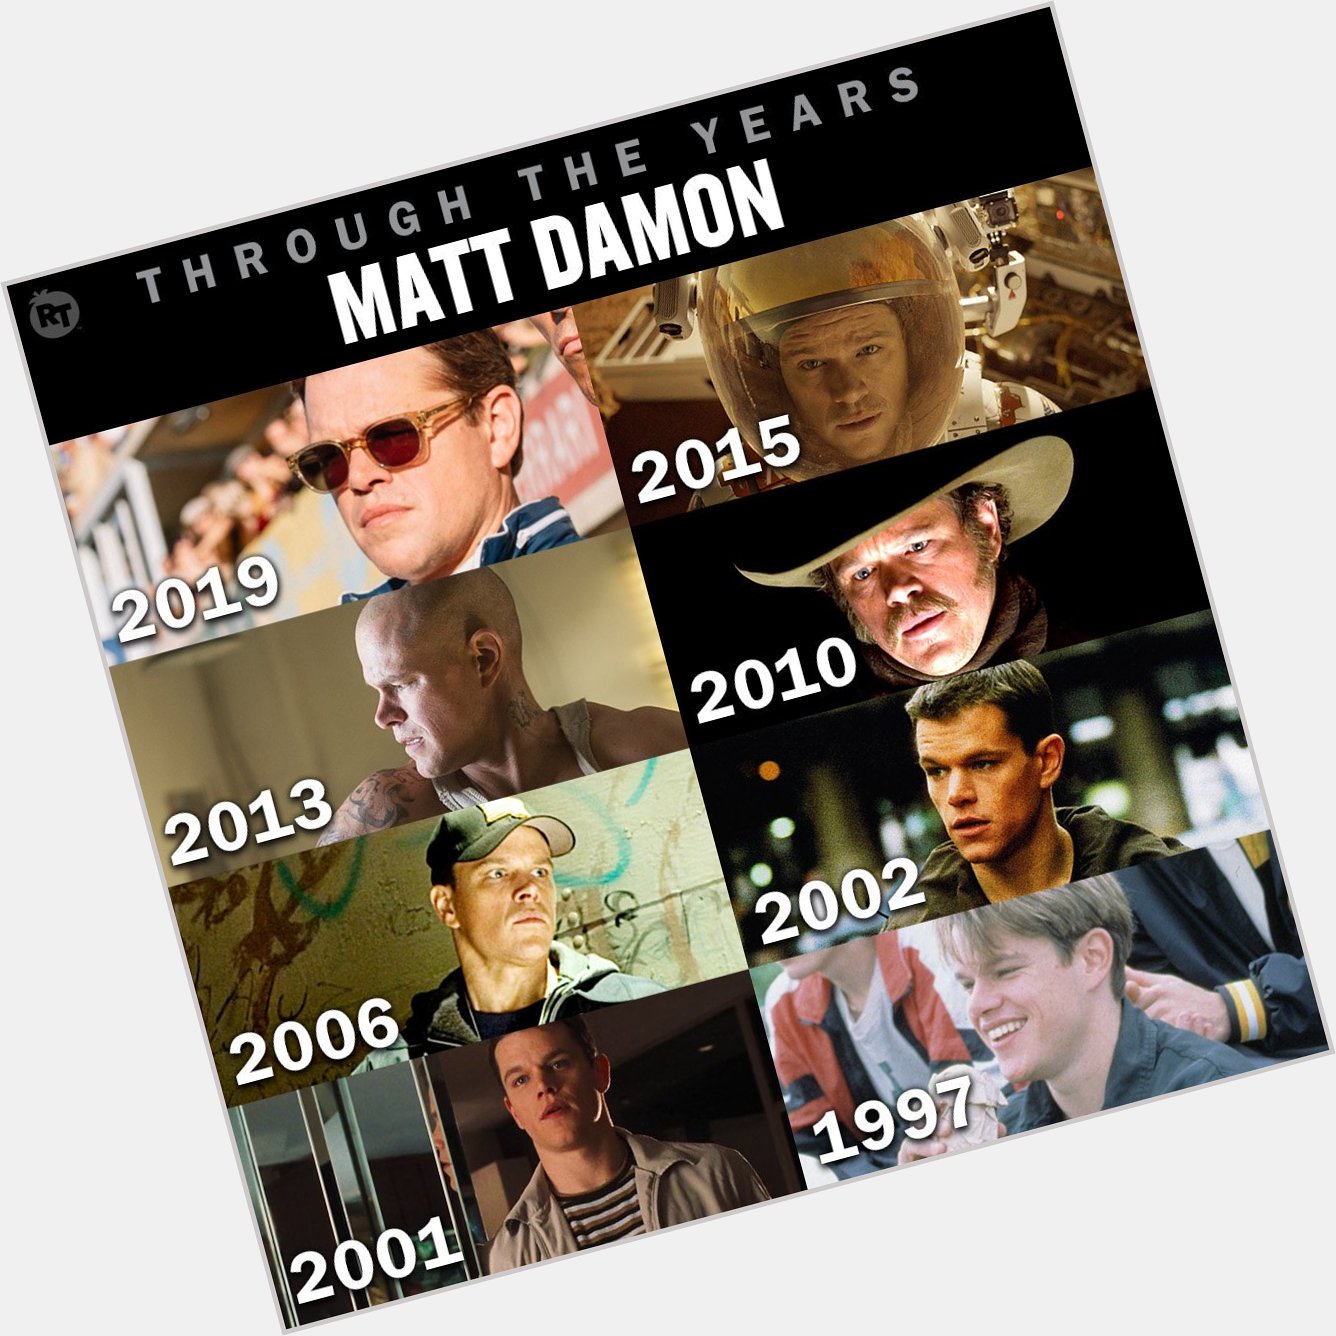 Happy birthday to the talented Matt Damon - which of his films is your favorite? 